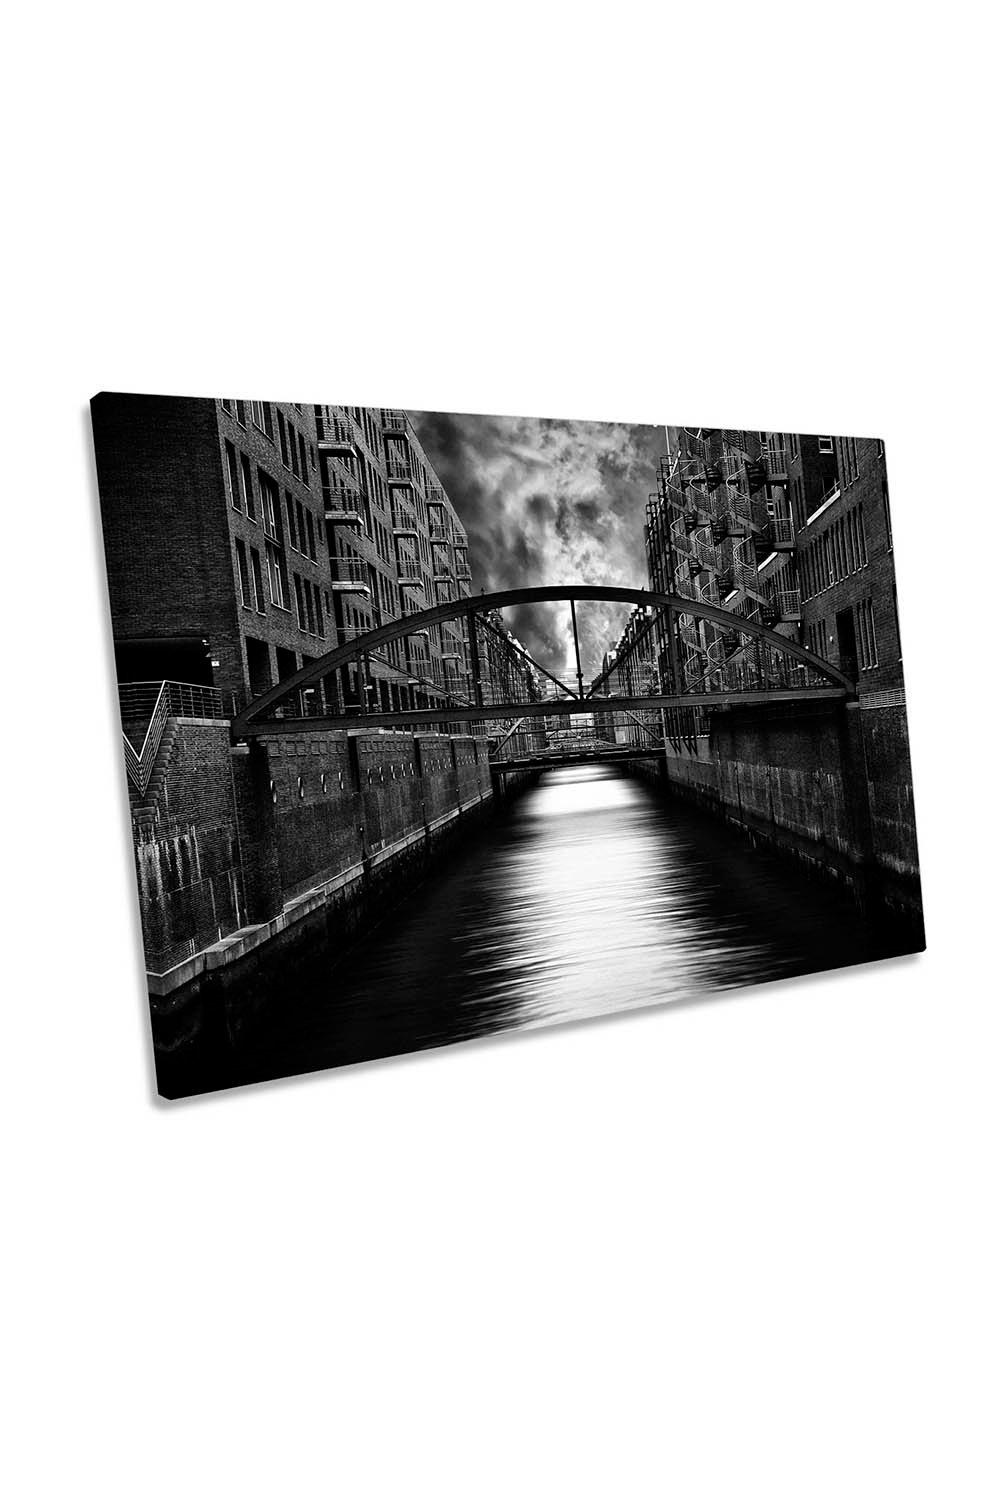 The Other Side of Hamburg Canal Canvas Wall Art Picture Print